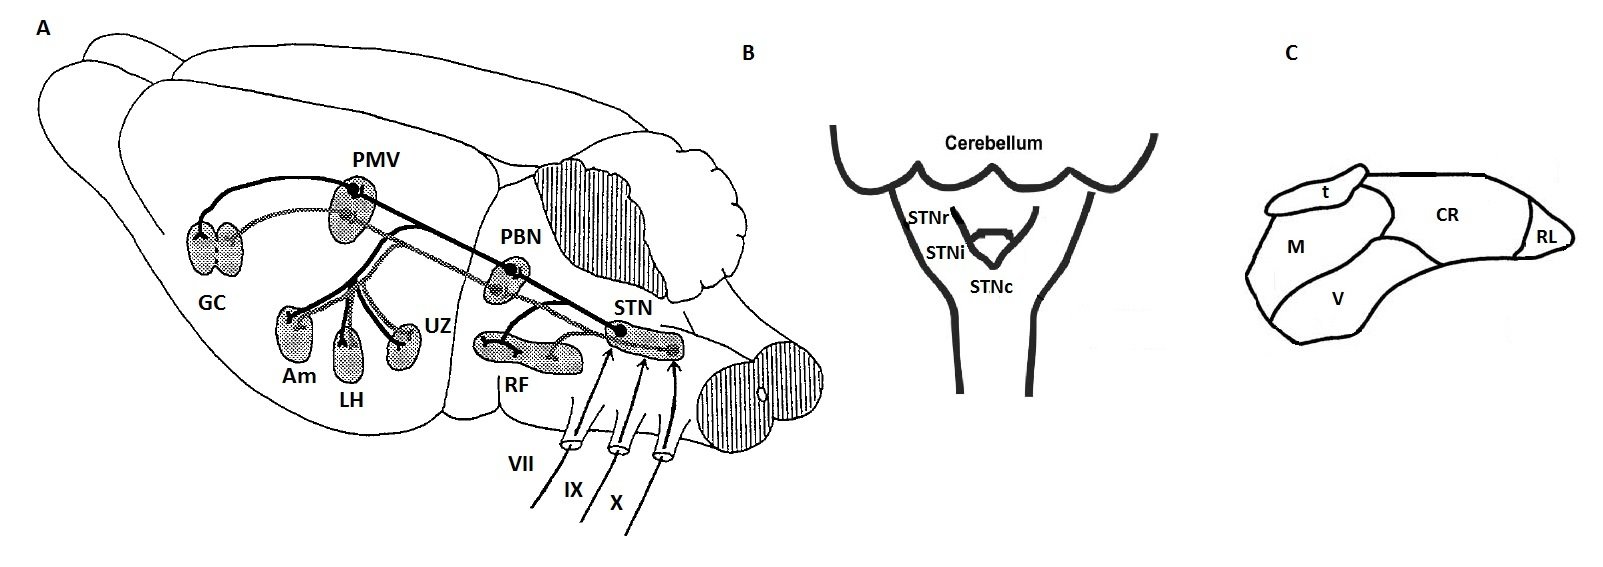 Rat's brain profile showing the solitary tract afferent innervation